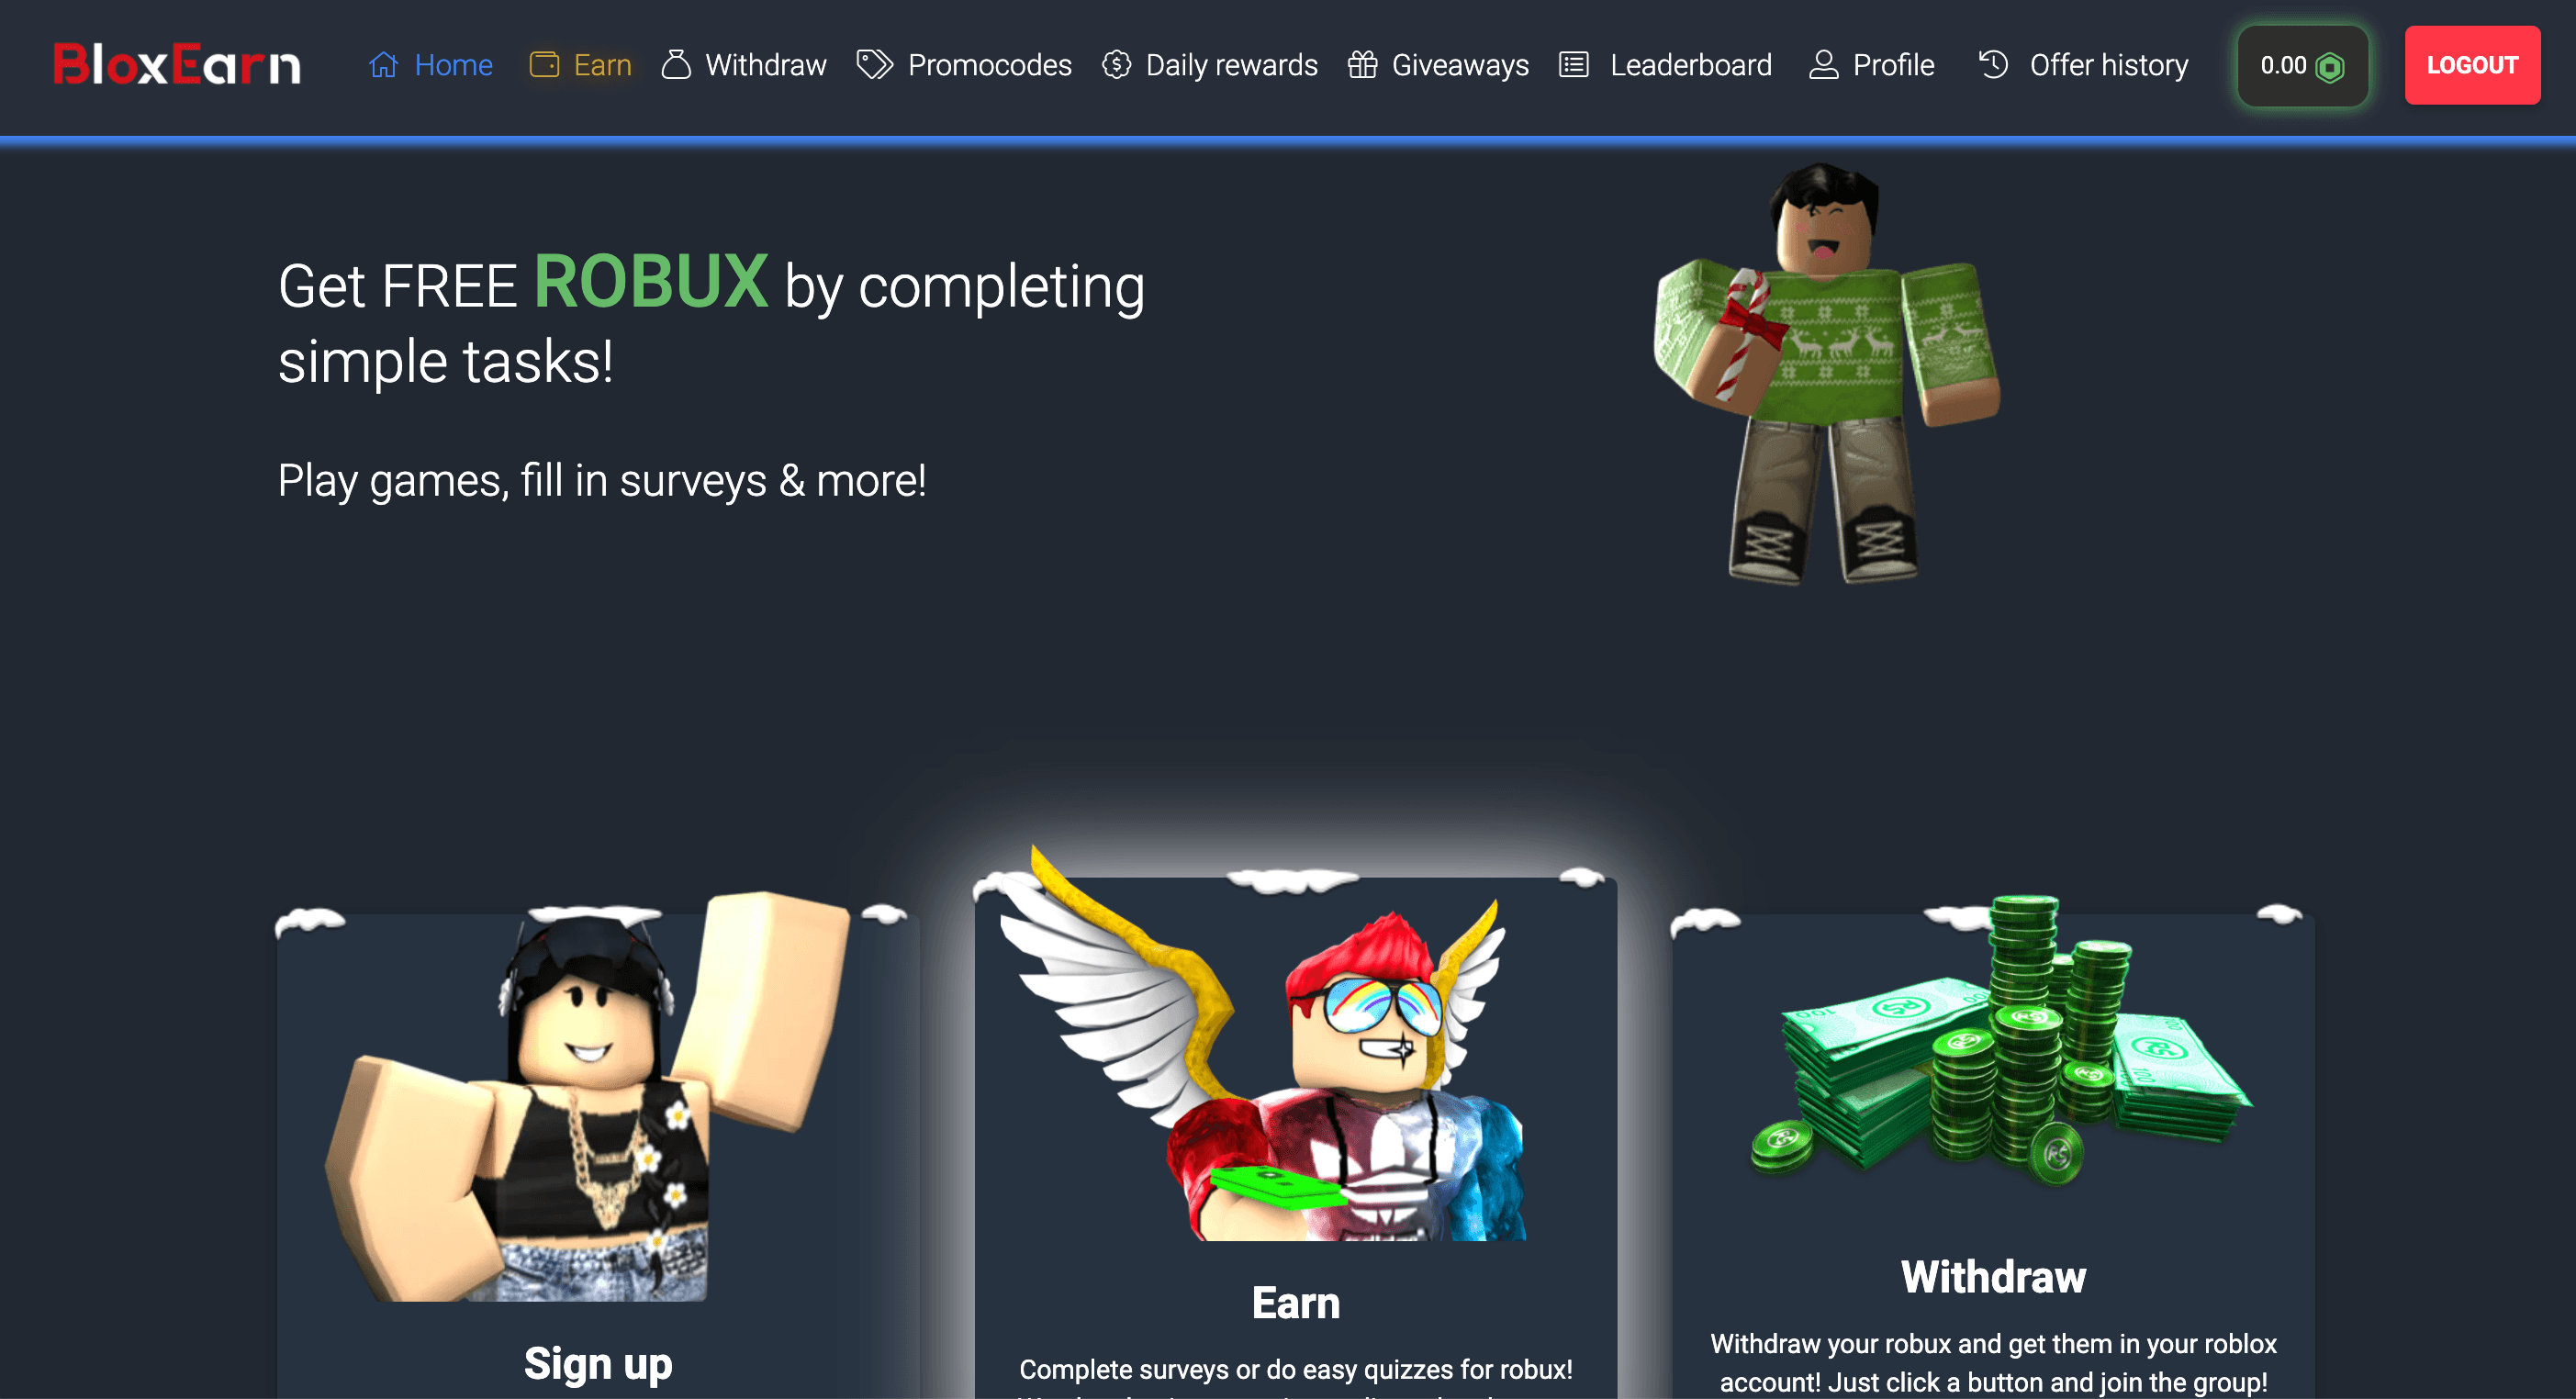 Roblox Promo Codes July 2021 For 1 000 Free Robux Items - how to get free robux on roblox games